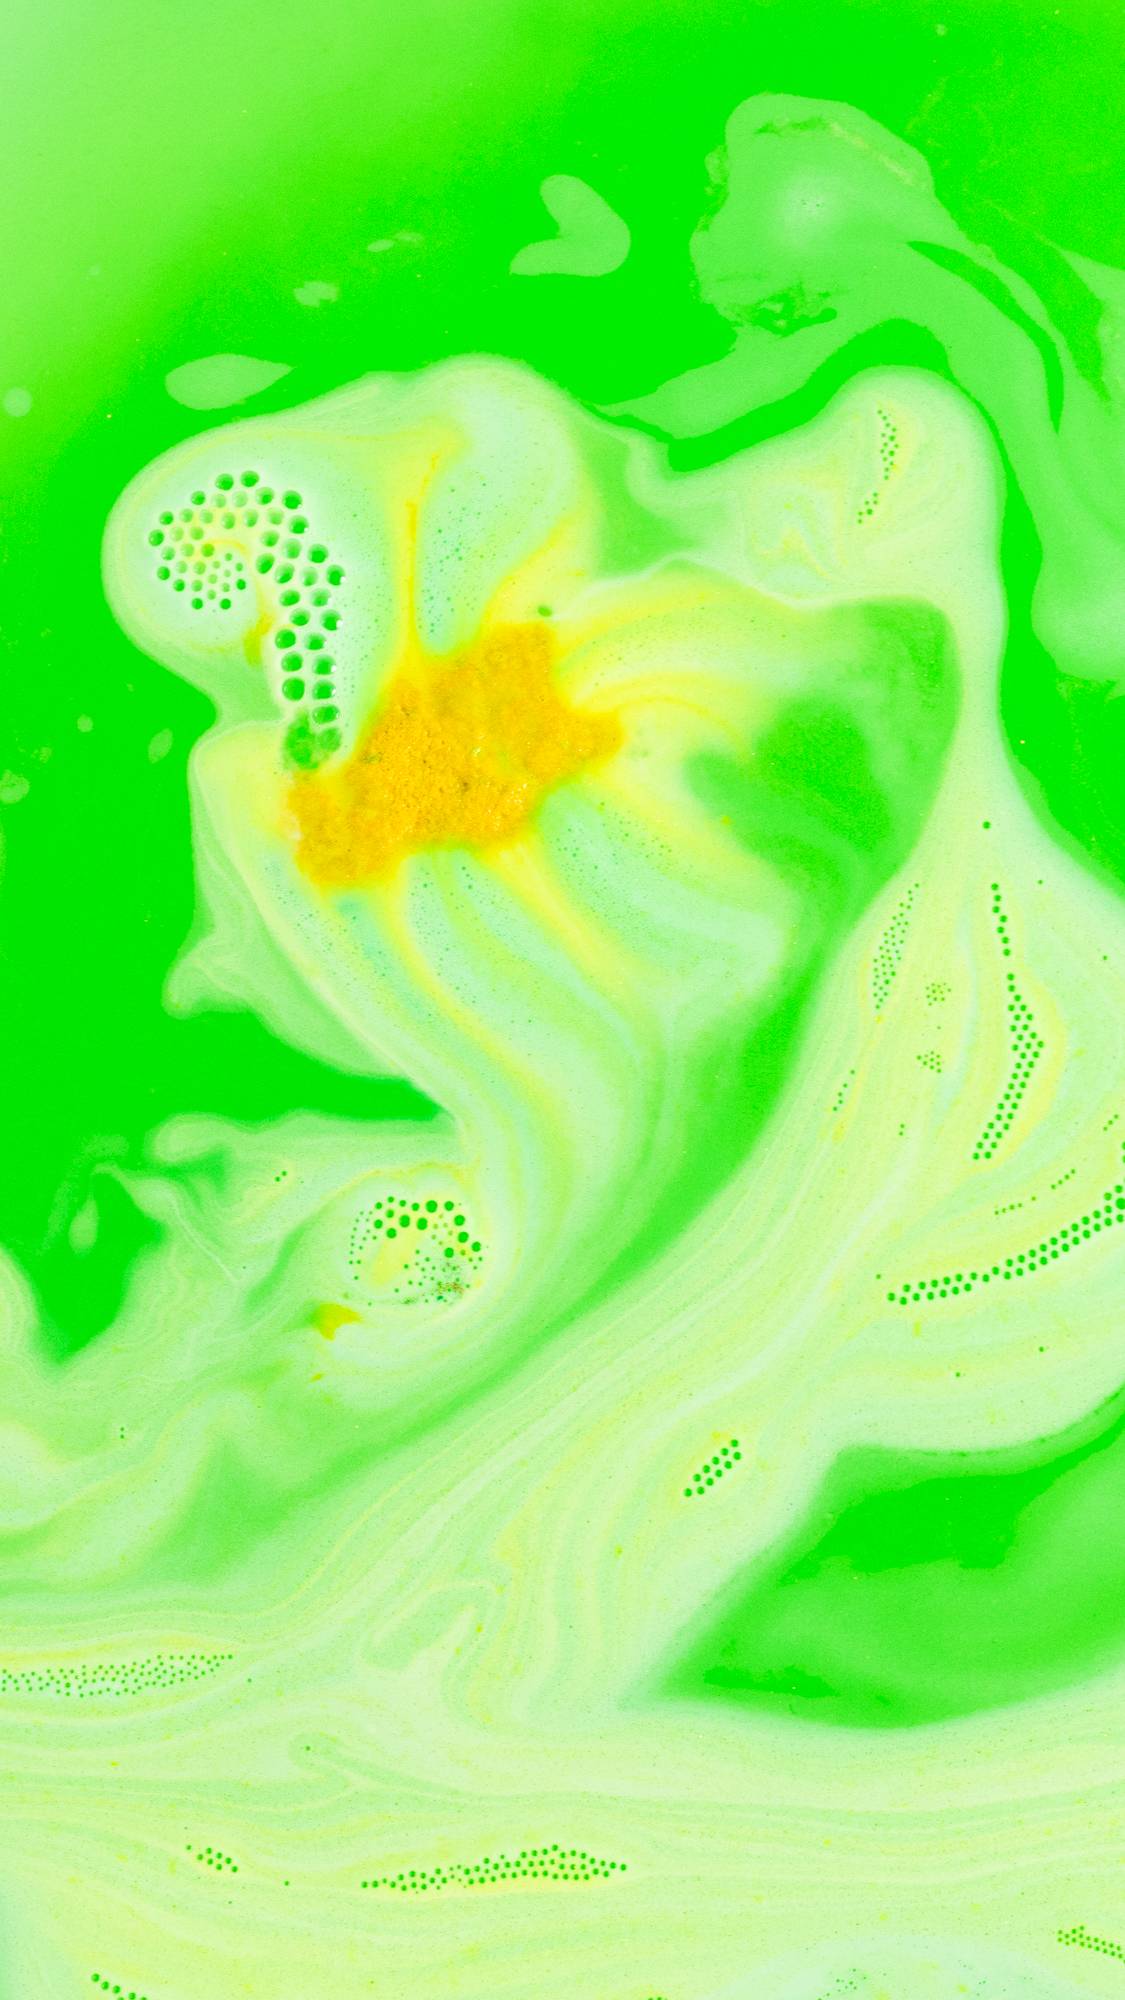 Catch Me If You Can bath bomb almost fully dissolved on a carpet of bright neon green and yellow foam.